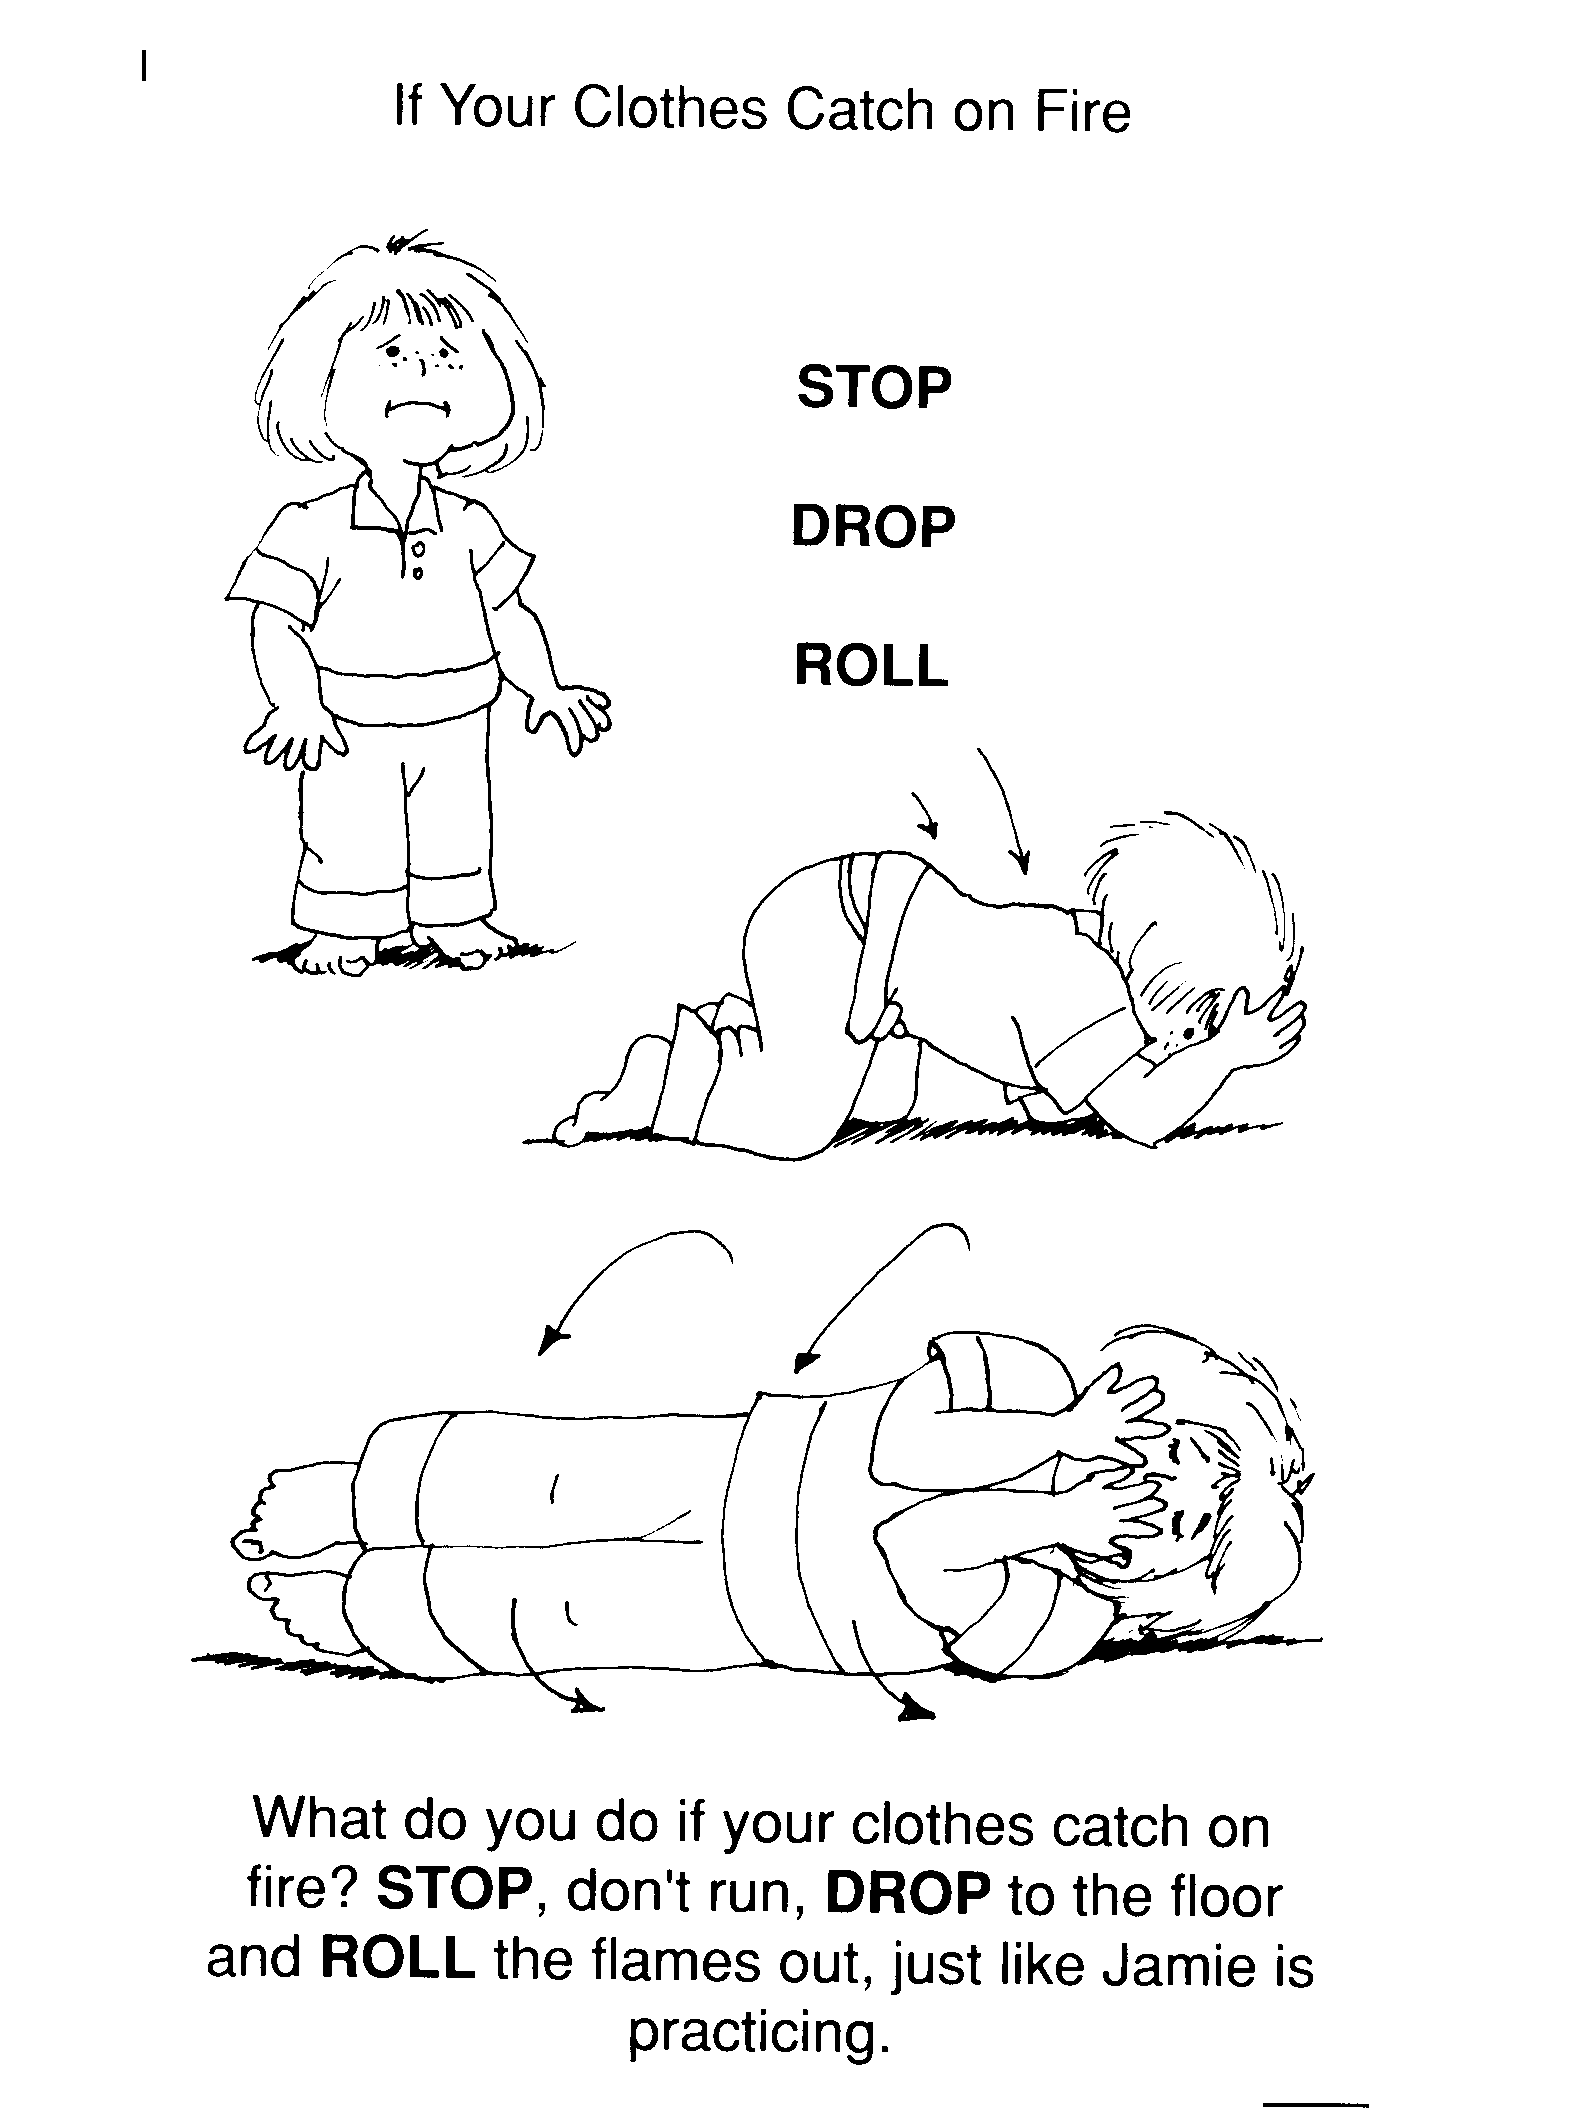 stop-drop-roll-coloring-home